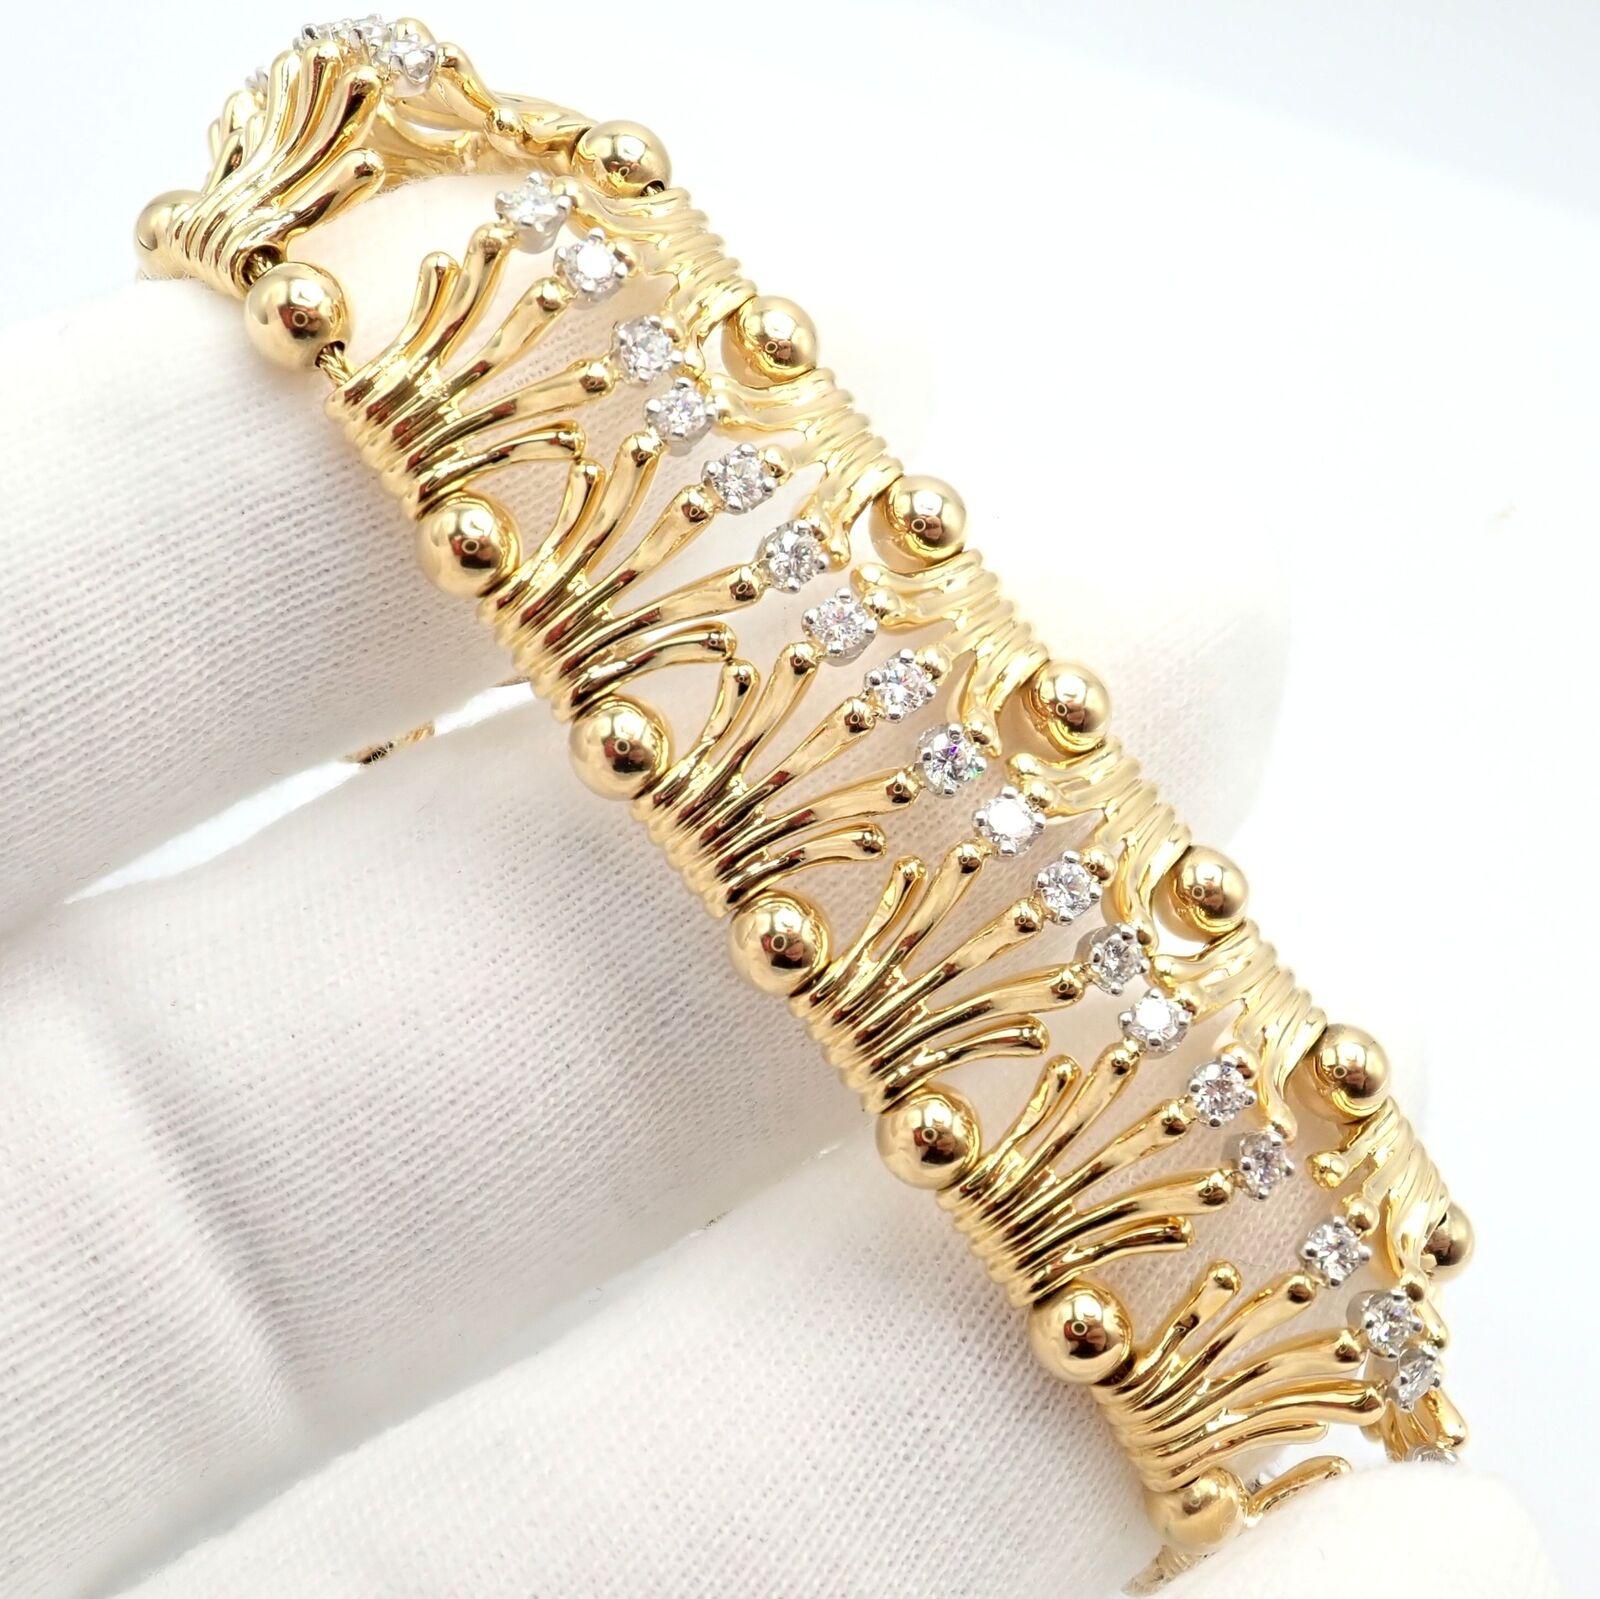 Tiffany & Co Jean Schlumberger Diamond Yellow Gold And Platinum Hands Bracelet For Sale 3